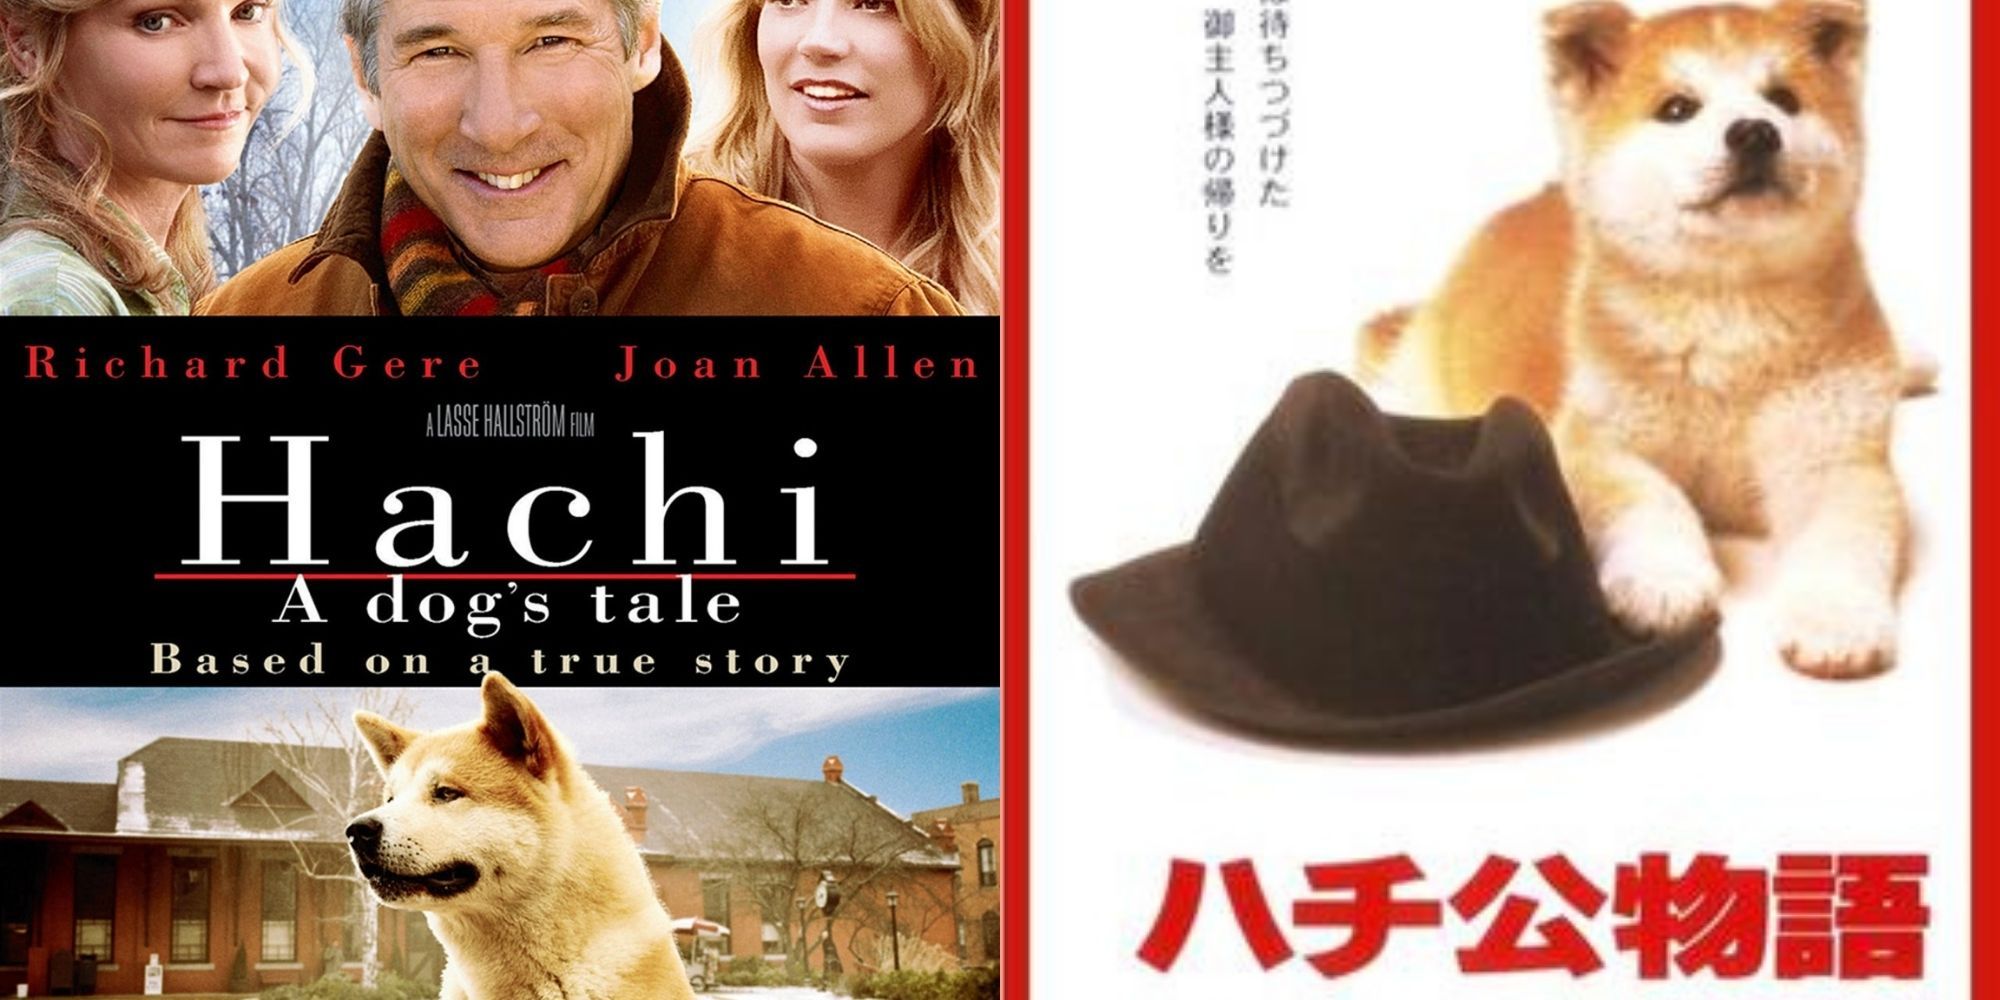 Hachi poster on the left and Hachiko poster on the right